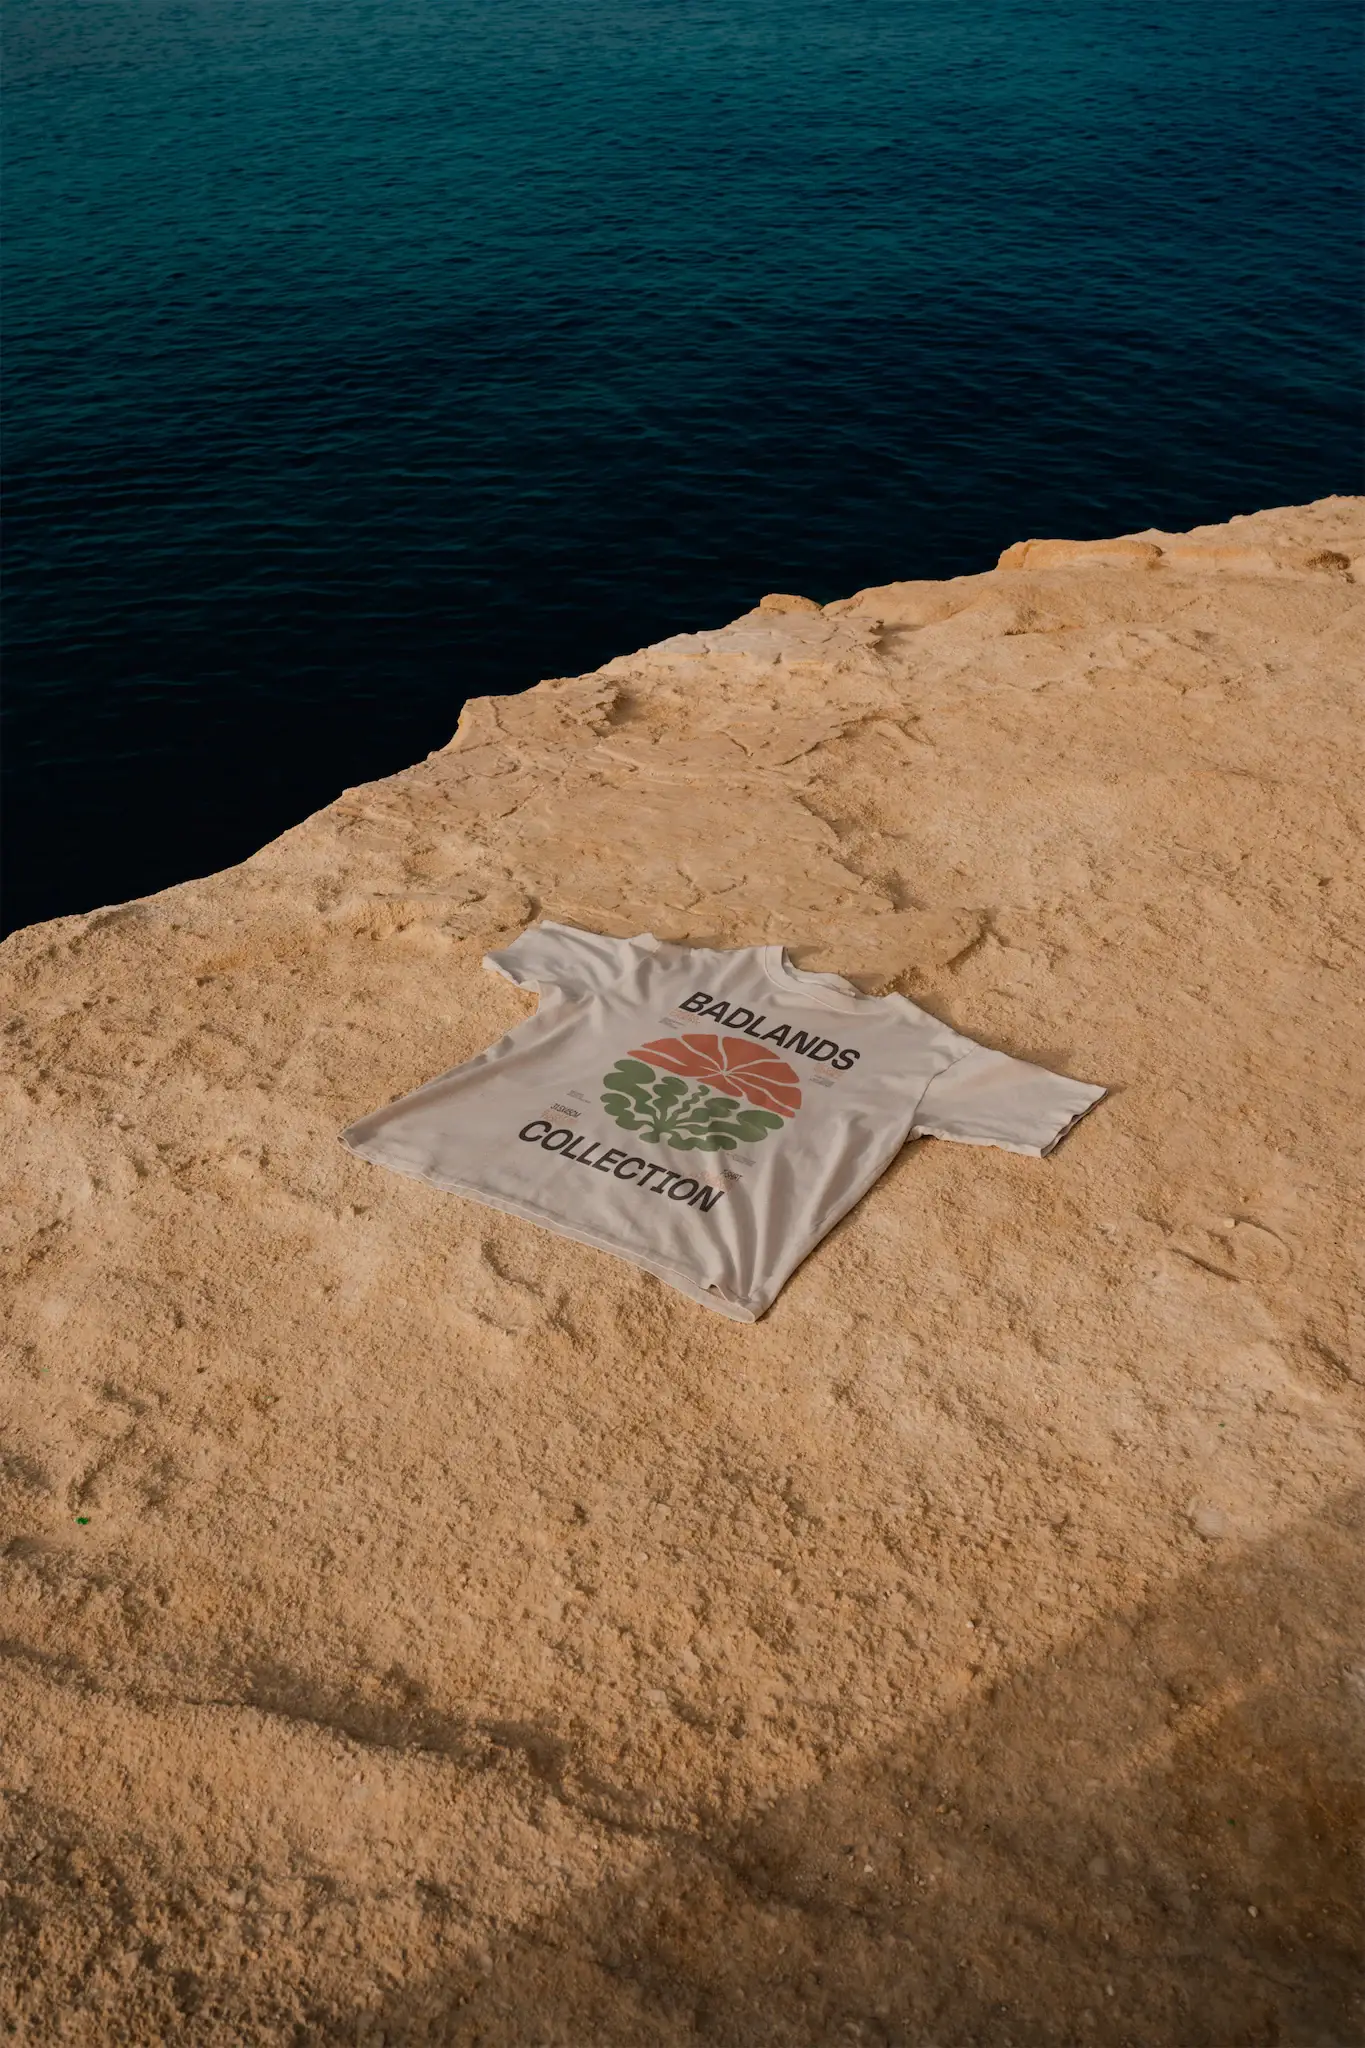 T-Shirt mock-up on a rocky surface next to the sea